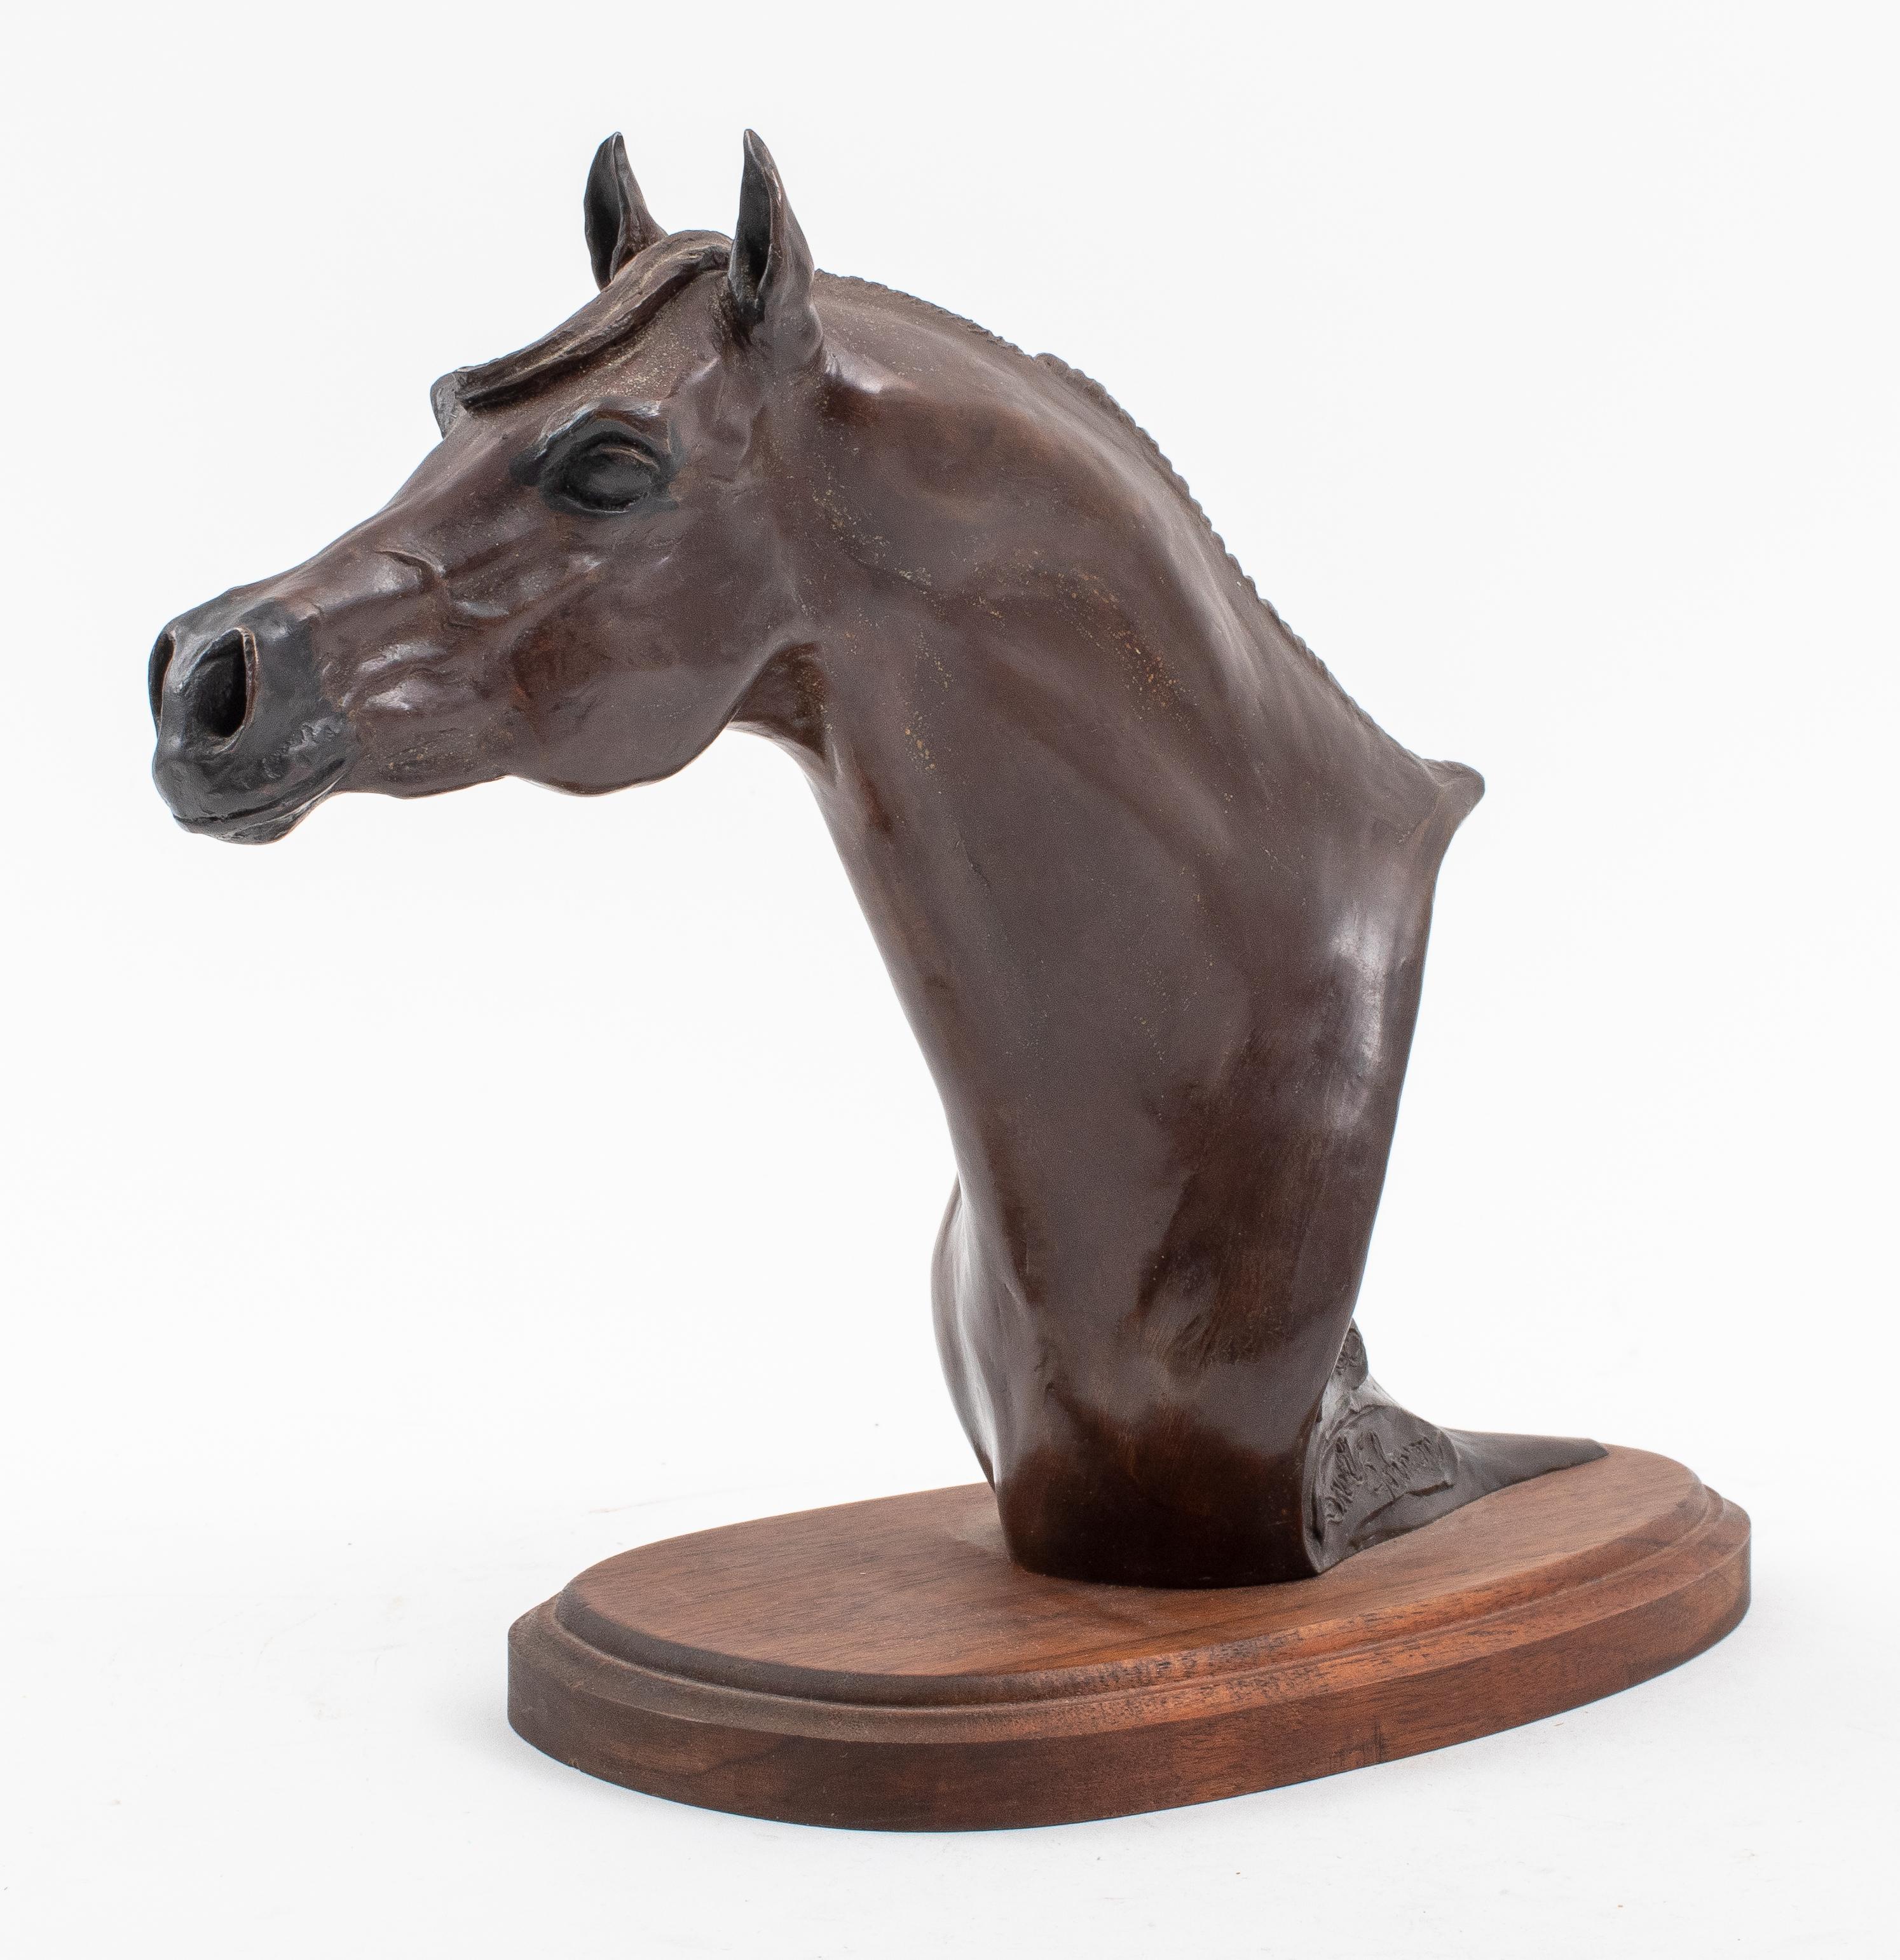 Snell Johnson (American, 1929-2001) bronze horse bust sculpture of NV Pingo mounted on an ovoid wooden base, titled, signed, numbered and marked 